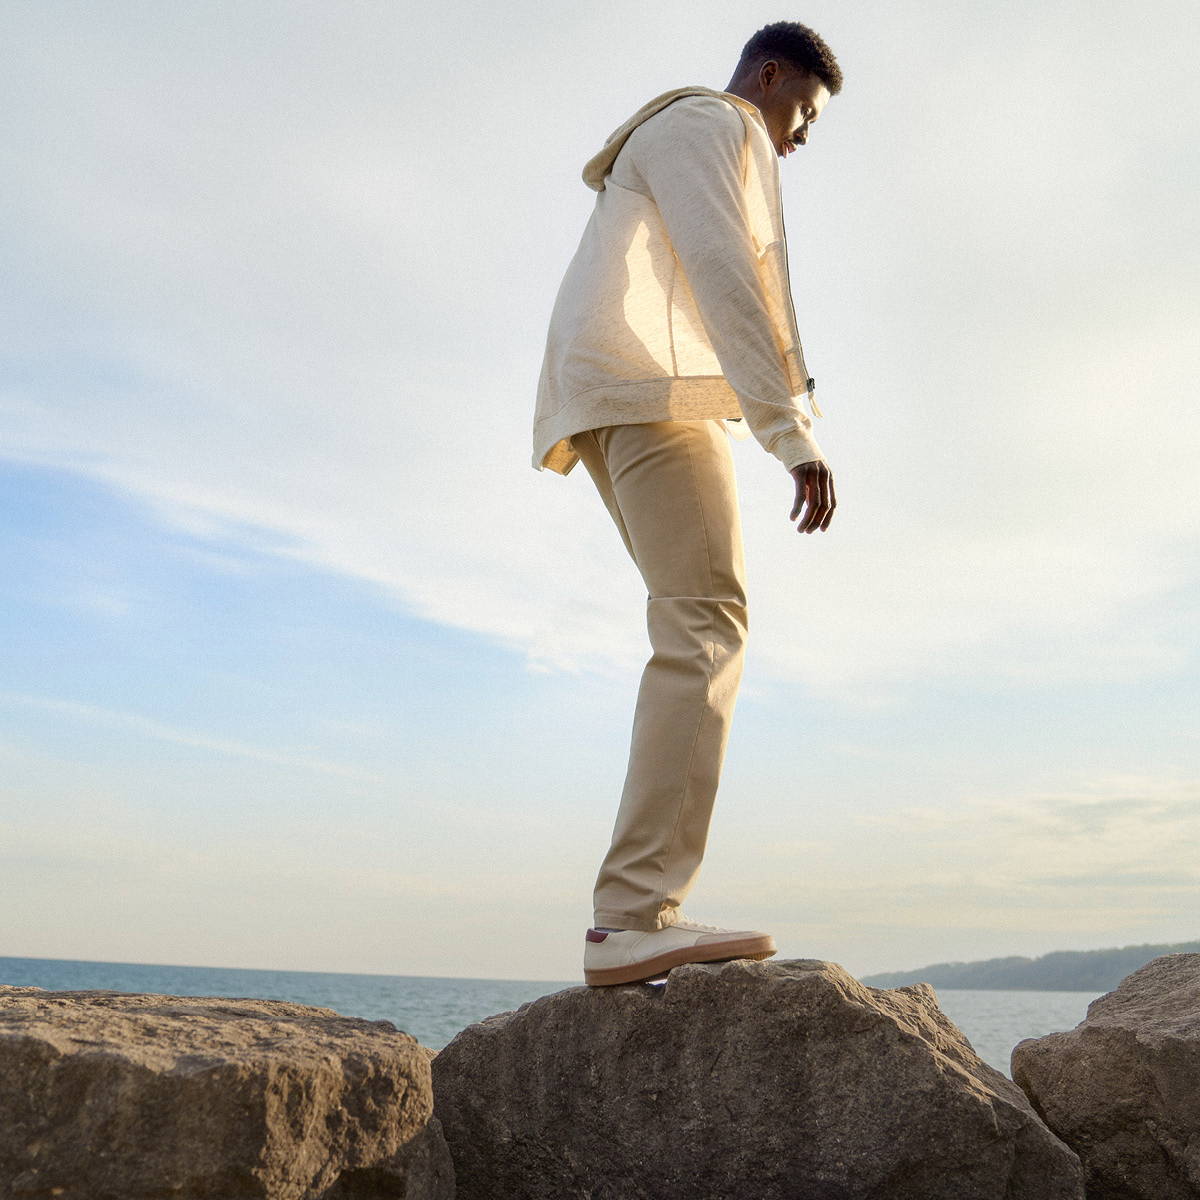 Tall man walking on rocks by the water wearing a beige sweater and khaki pants